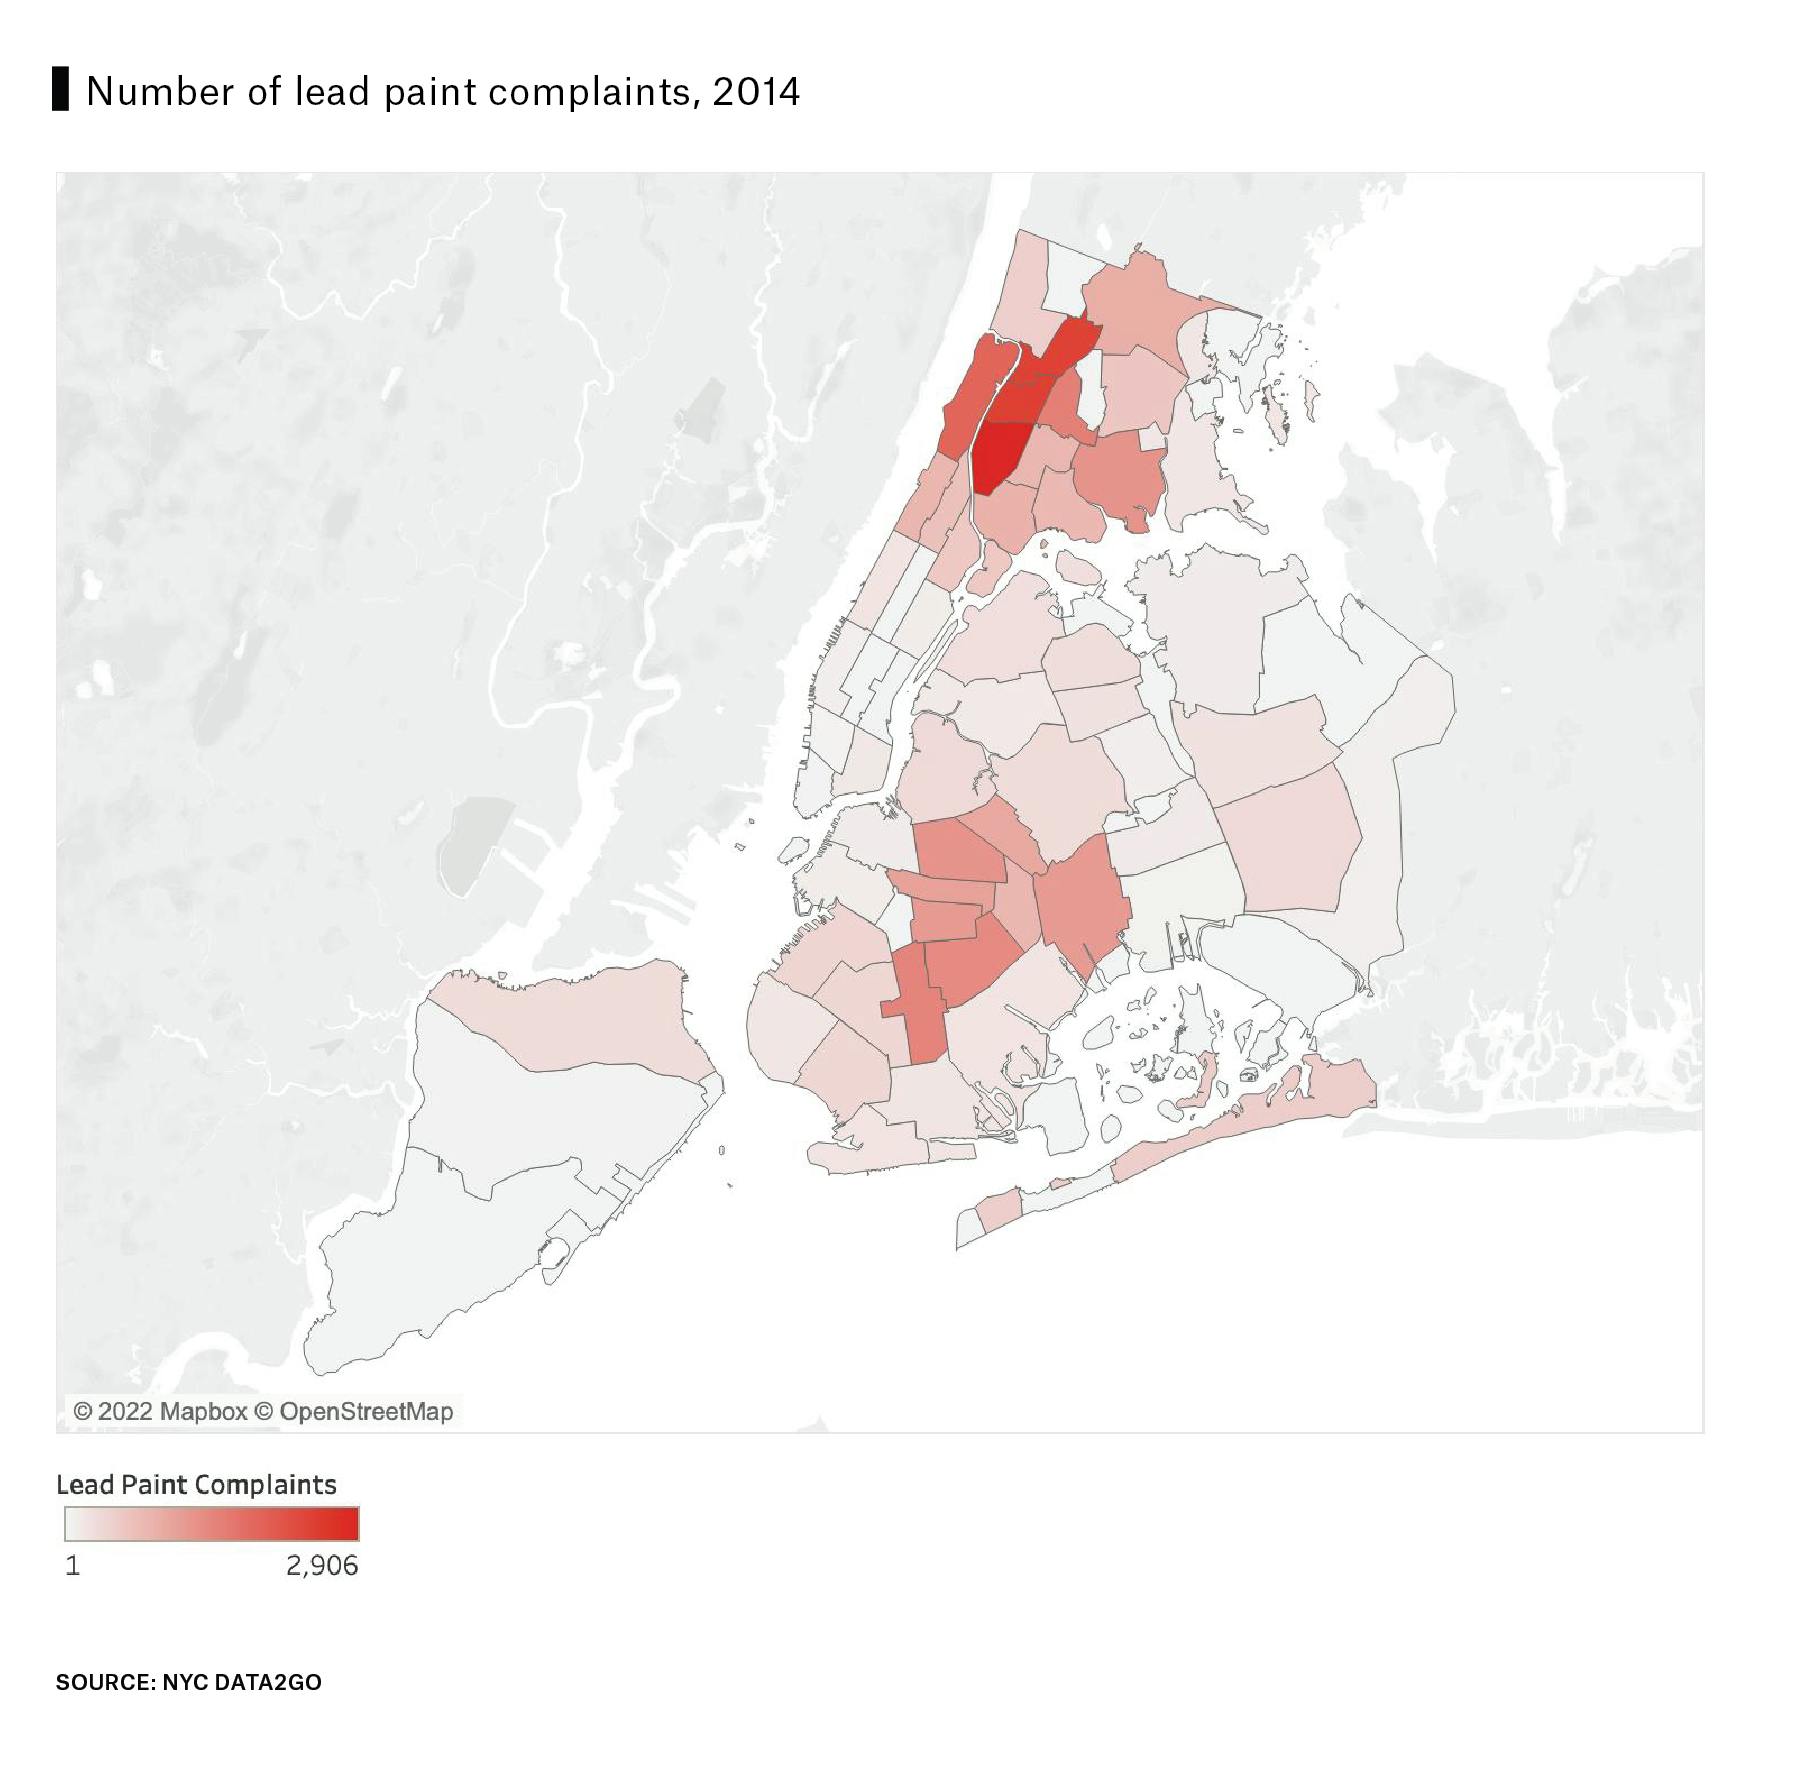 Area map shows the number of lead paint complaints by precinct in 2014. Most complaints are concentrated in the Bronx, followed by Brooklyn. There are fewer complaints in Queens and Staten Island with a very low number of complaints in Manhattan. 